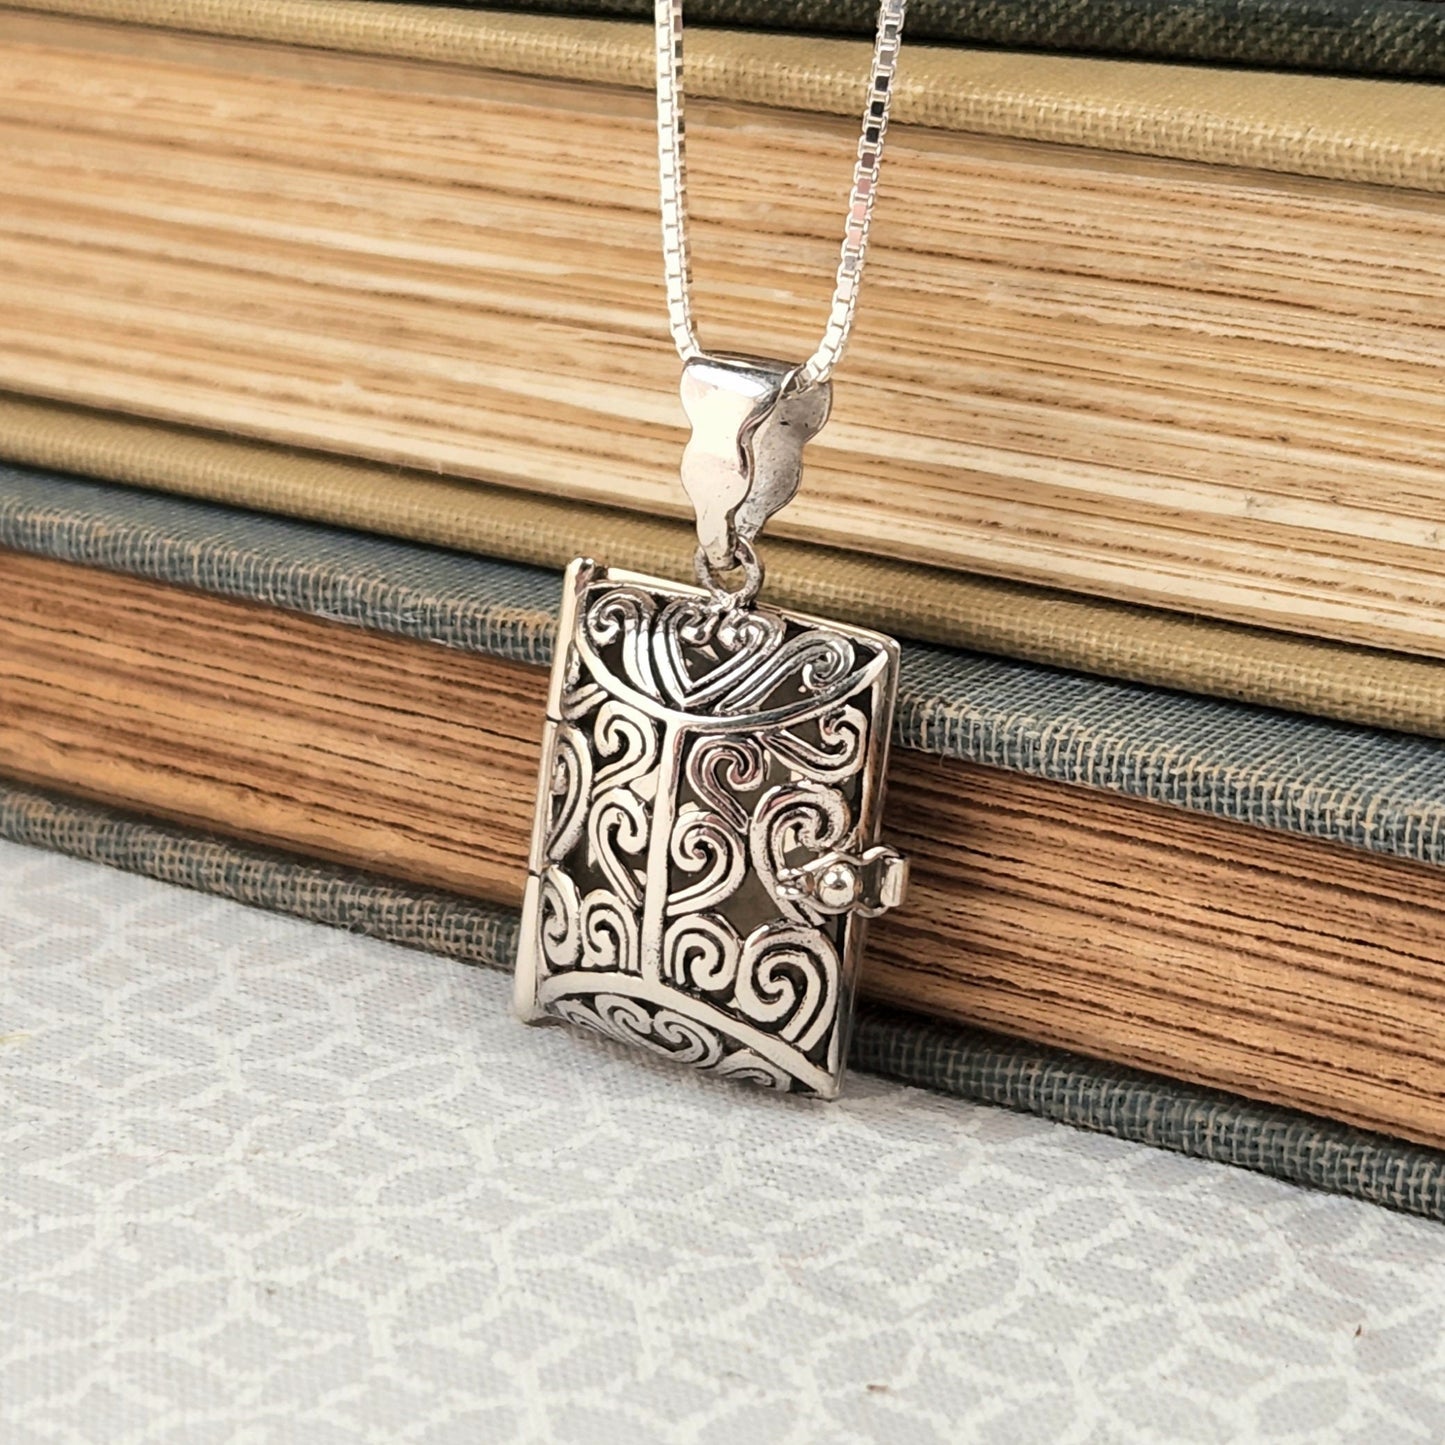 Aromatherapy Book Locket Opens to hold scented fabric